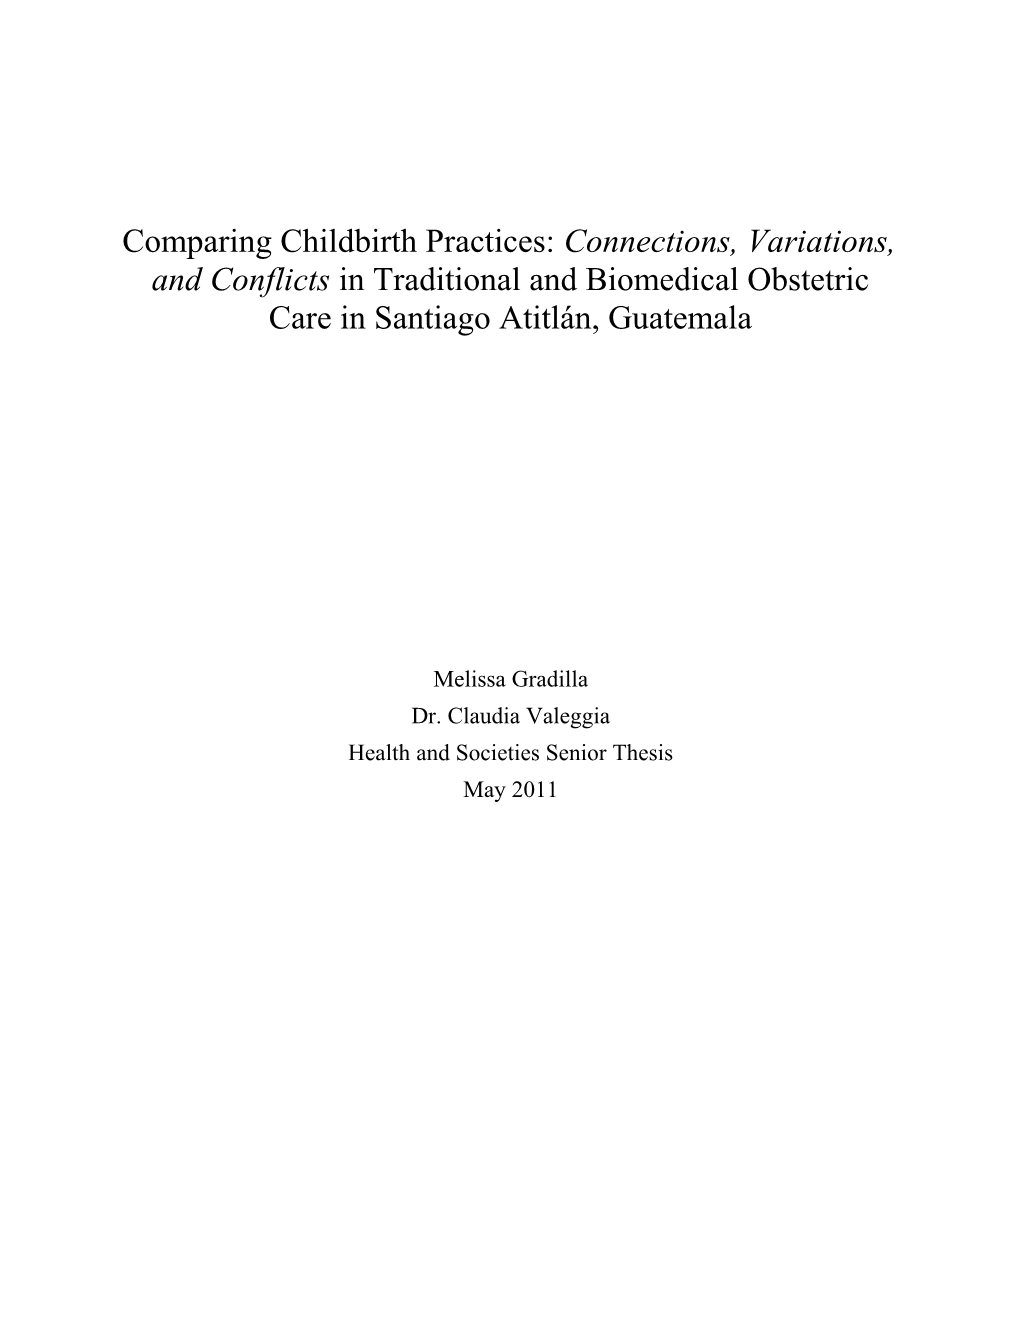 Comparing Childbirth Practices: Connections, Variations, and Conflicts in Traditional And